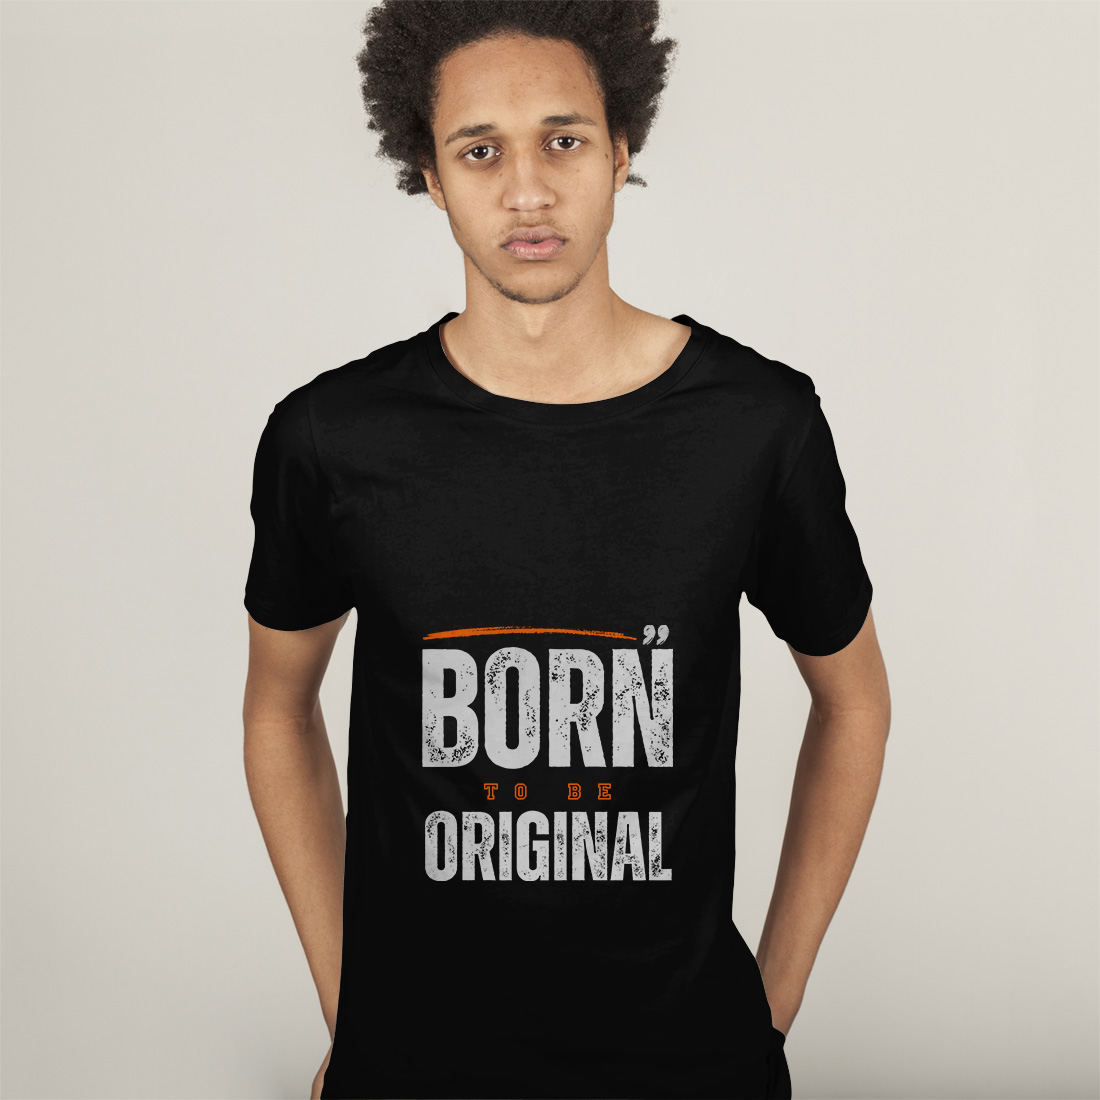 Born To Be Original Design SVG, PNG preview image.